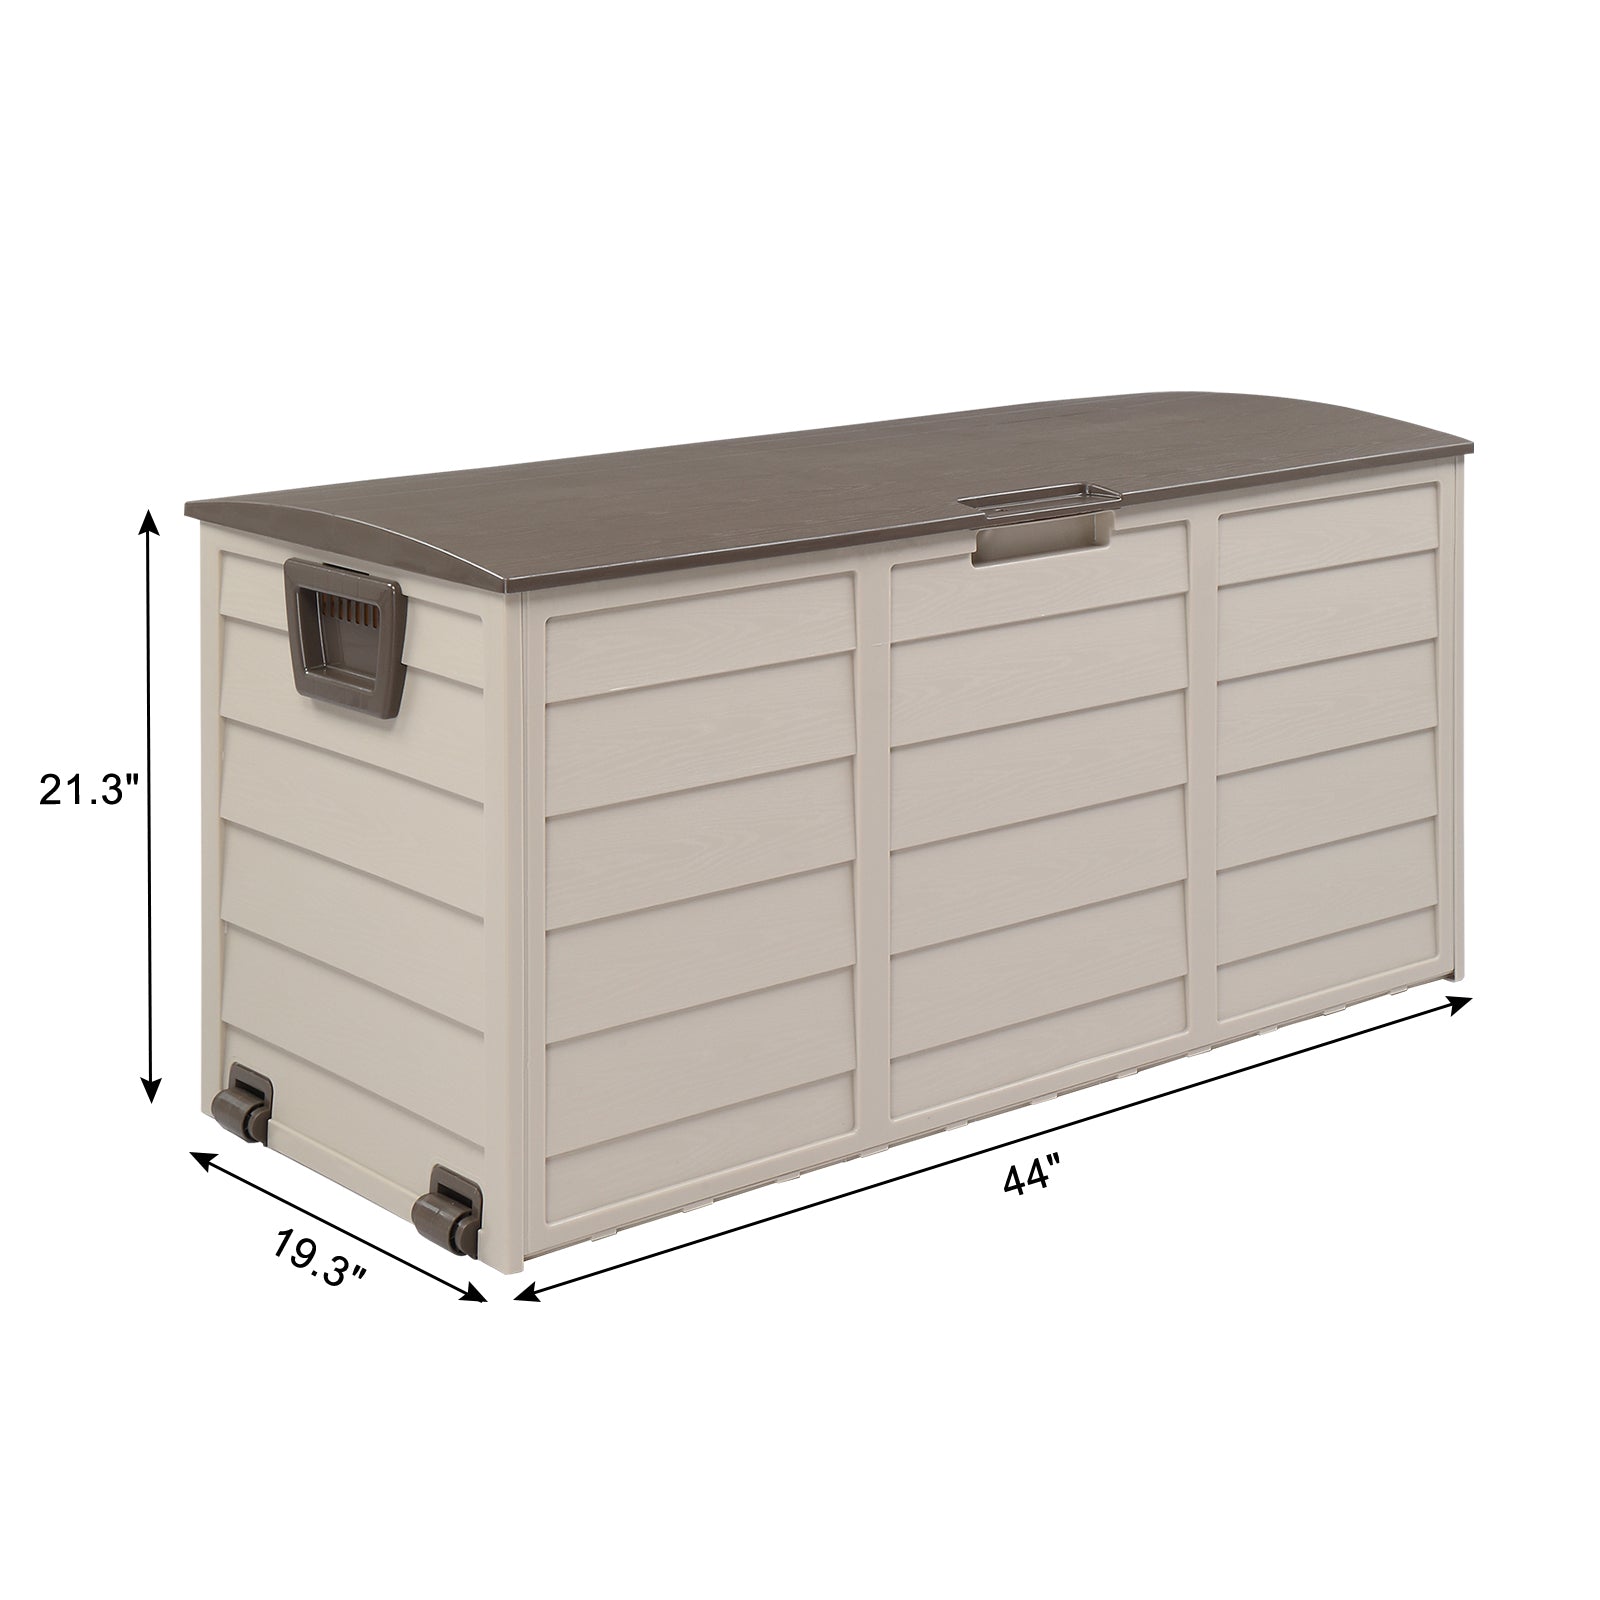 ZNTS 75gal 260L Outdoor Garden Plastic Storage Deck Box Chest Tools Cushions Toys Lockable Seat 98777319